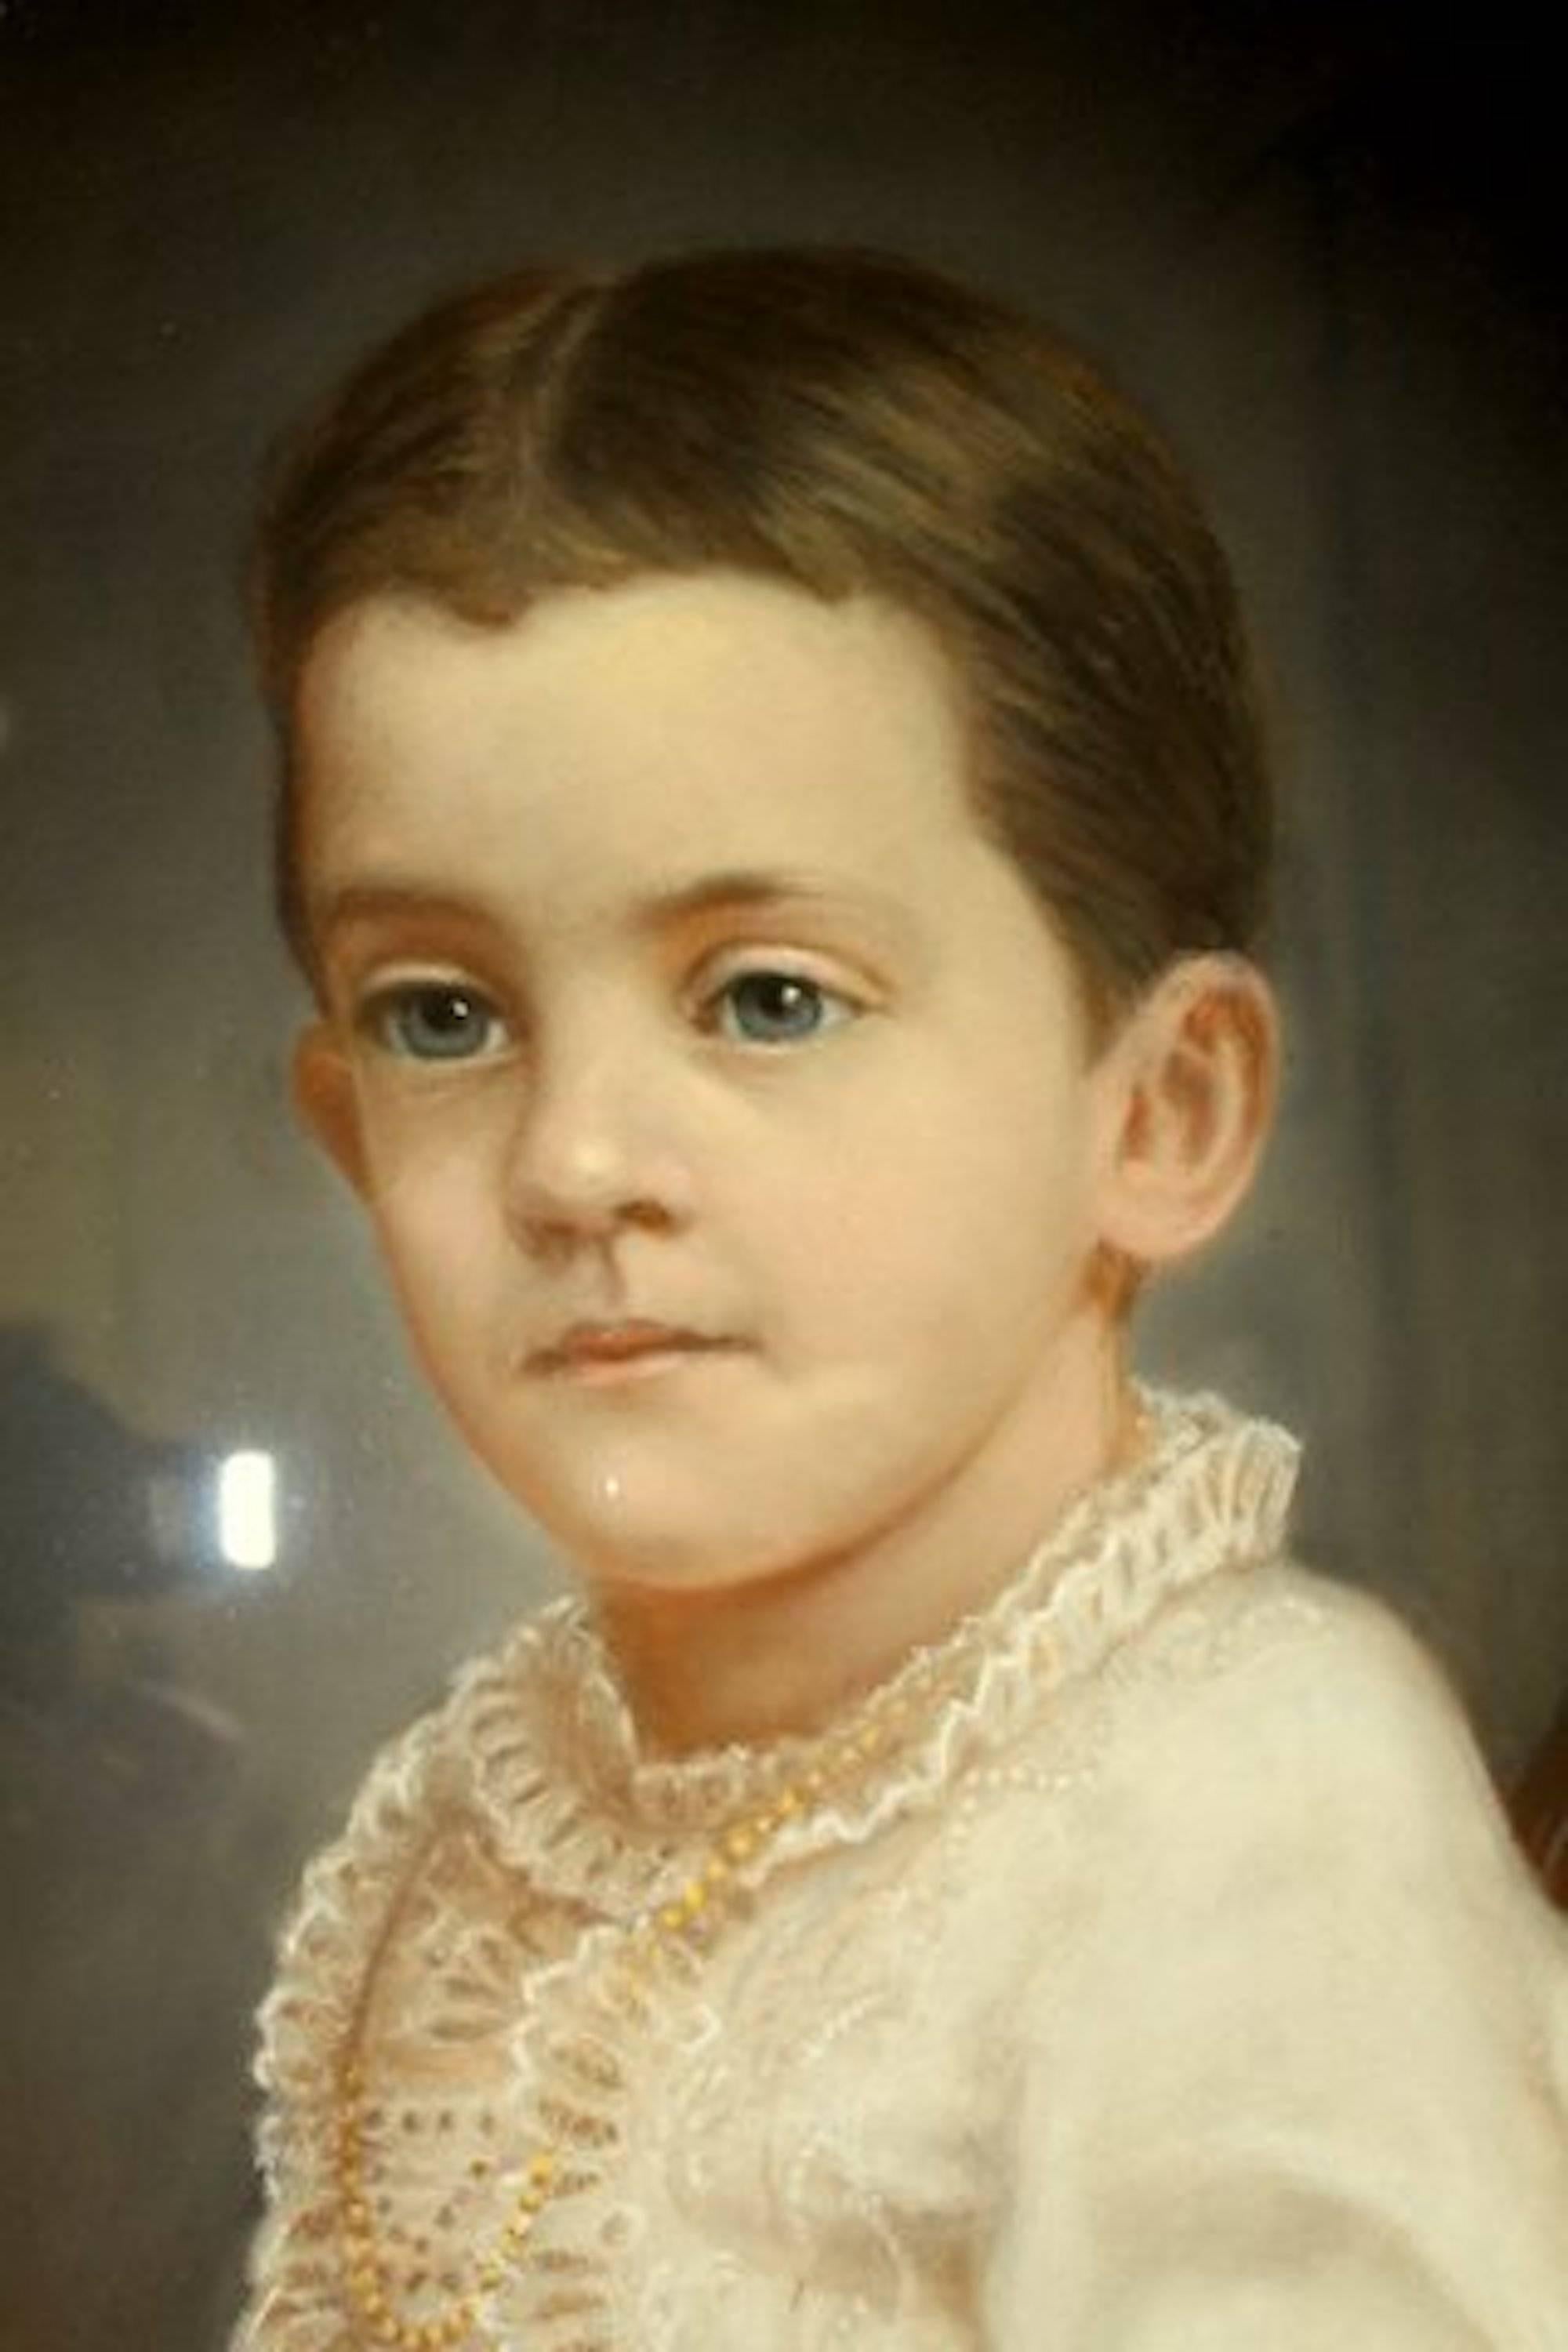 French Portrait of a Young Boy, Original 19th Century Pastel in Original Frame For Sale 1